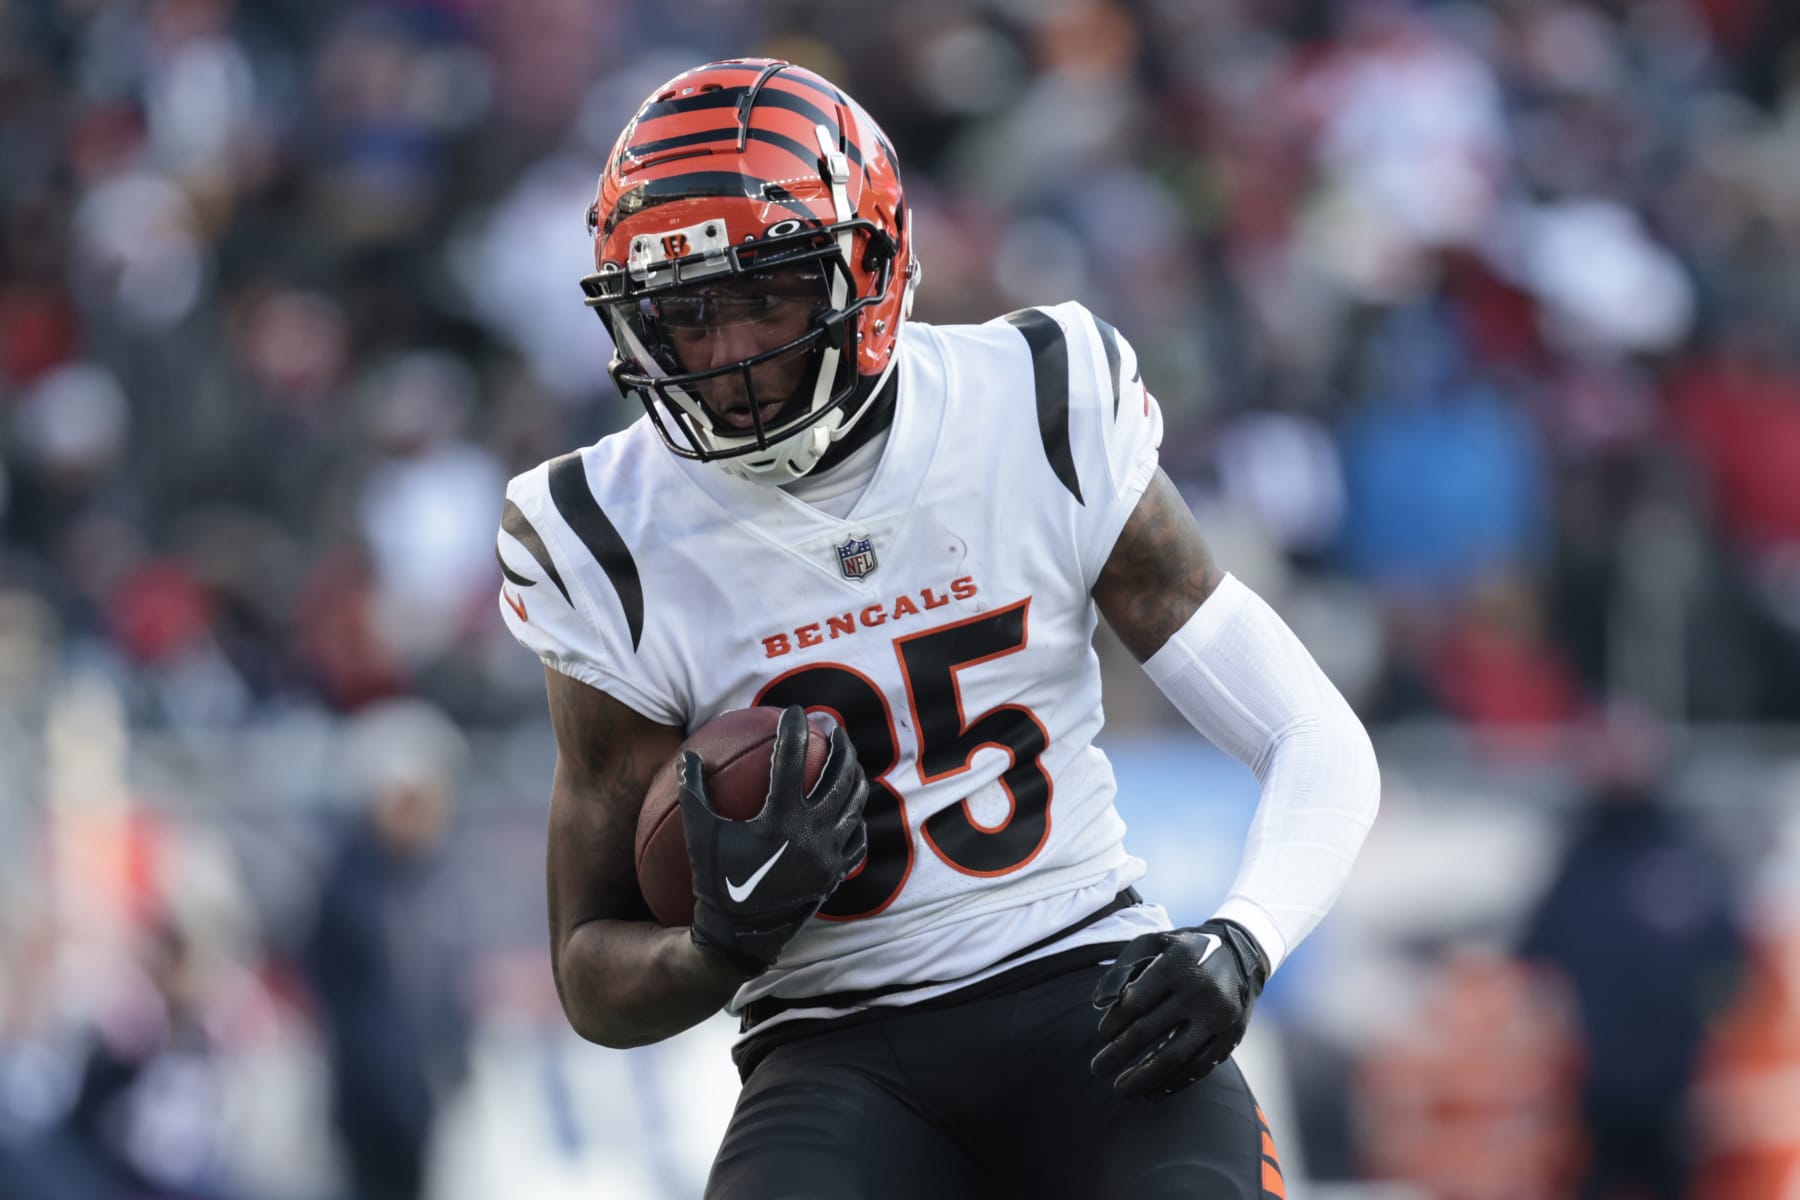 Tee Higgins injury news: Bengals WR on track to play for Week 14